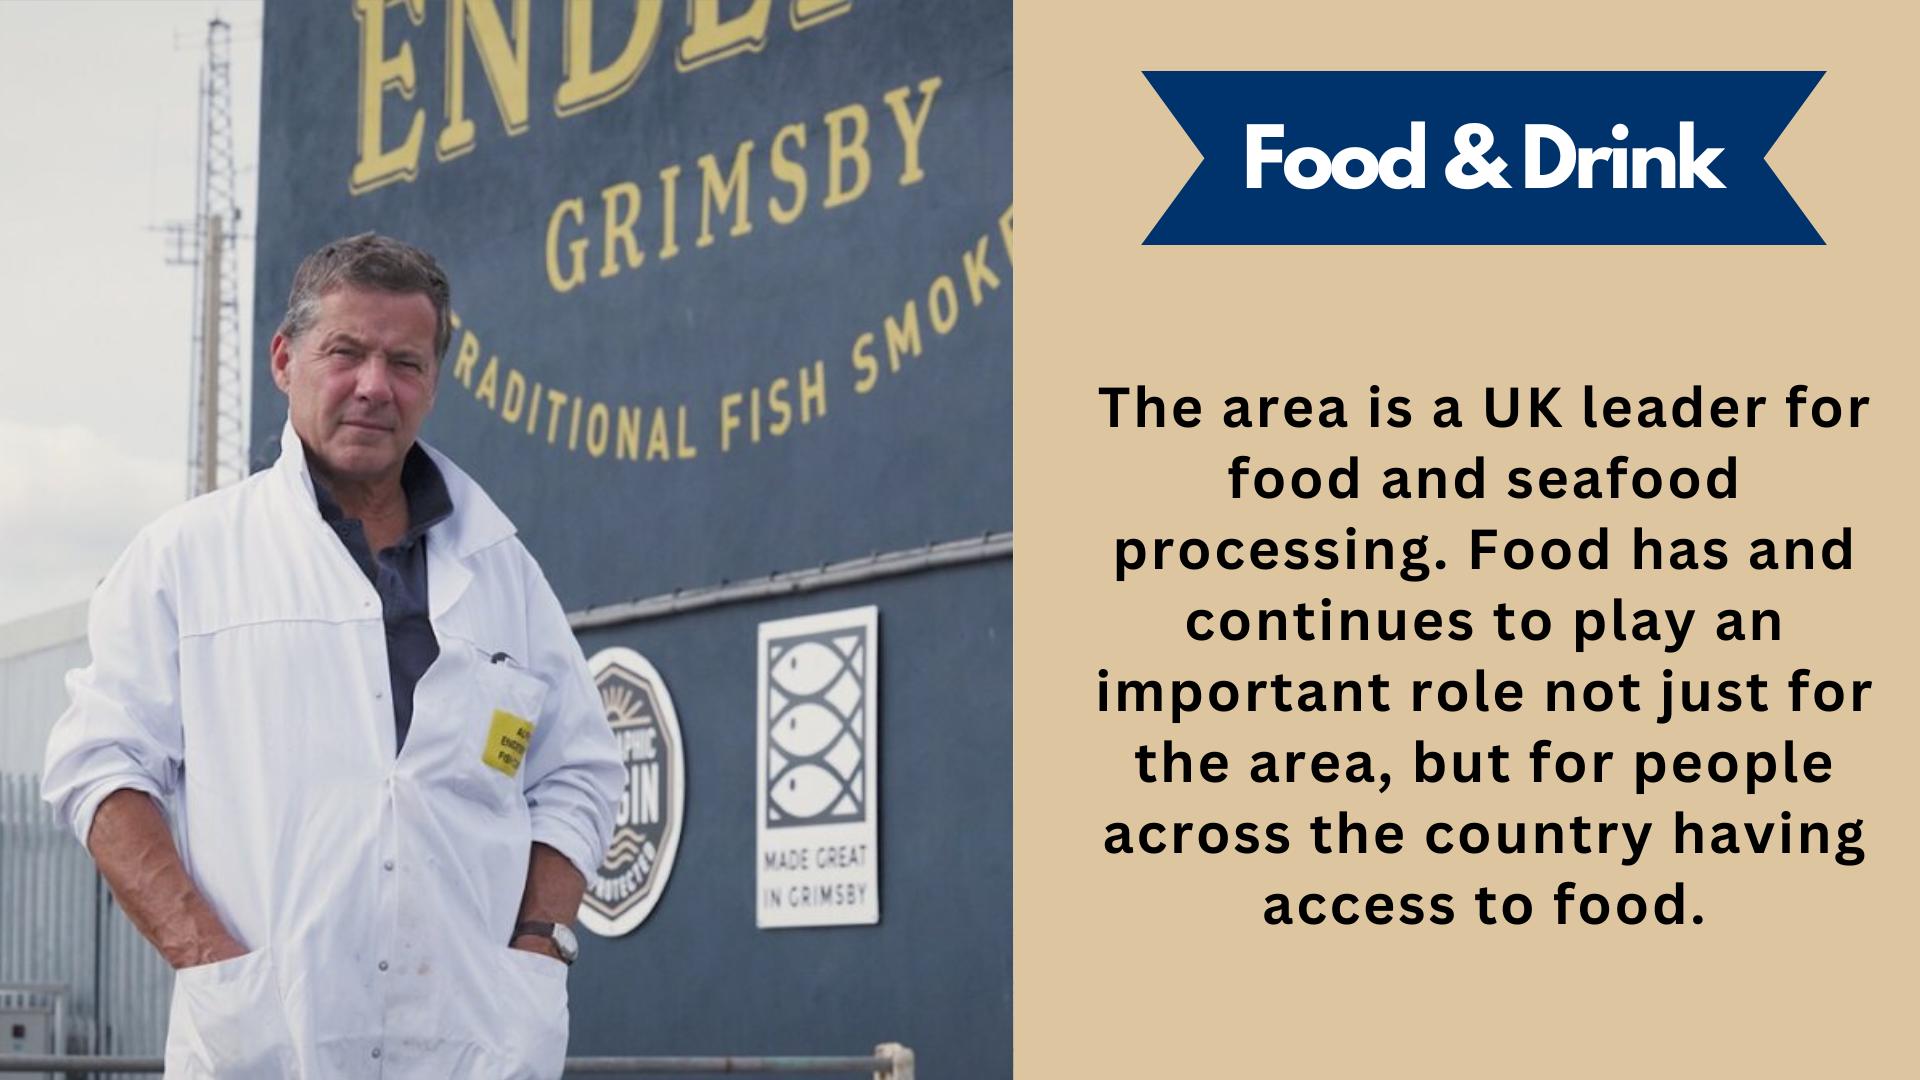 Food & Drink. The area is a UK leader for food and seafood processing. Food has and continues to play an important role not just for the area, but for people across the country having access to food.